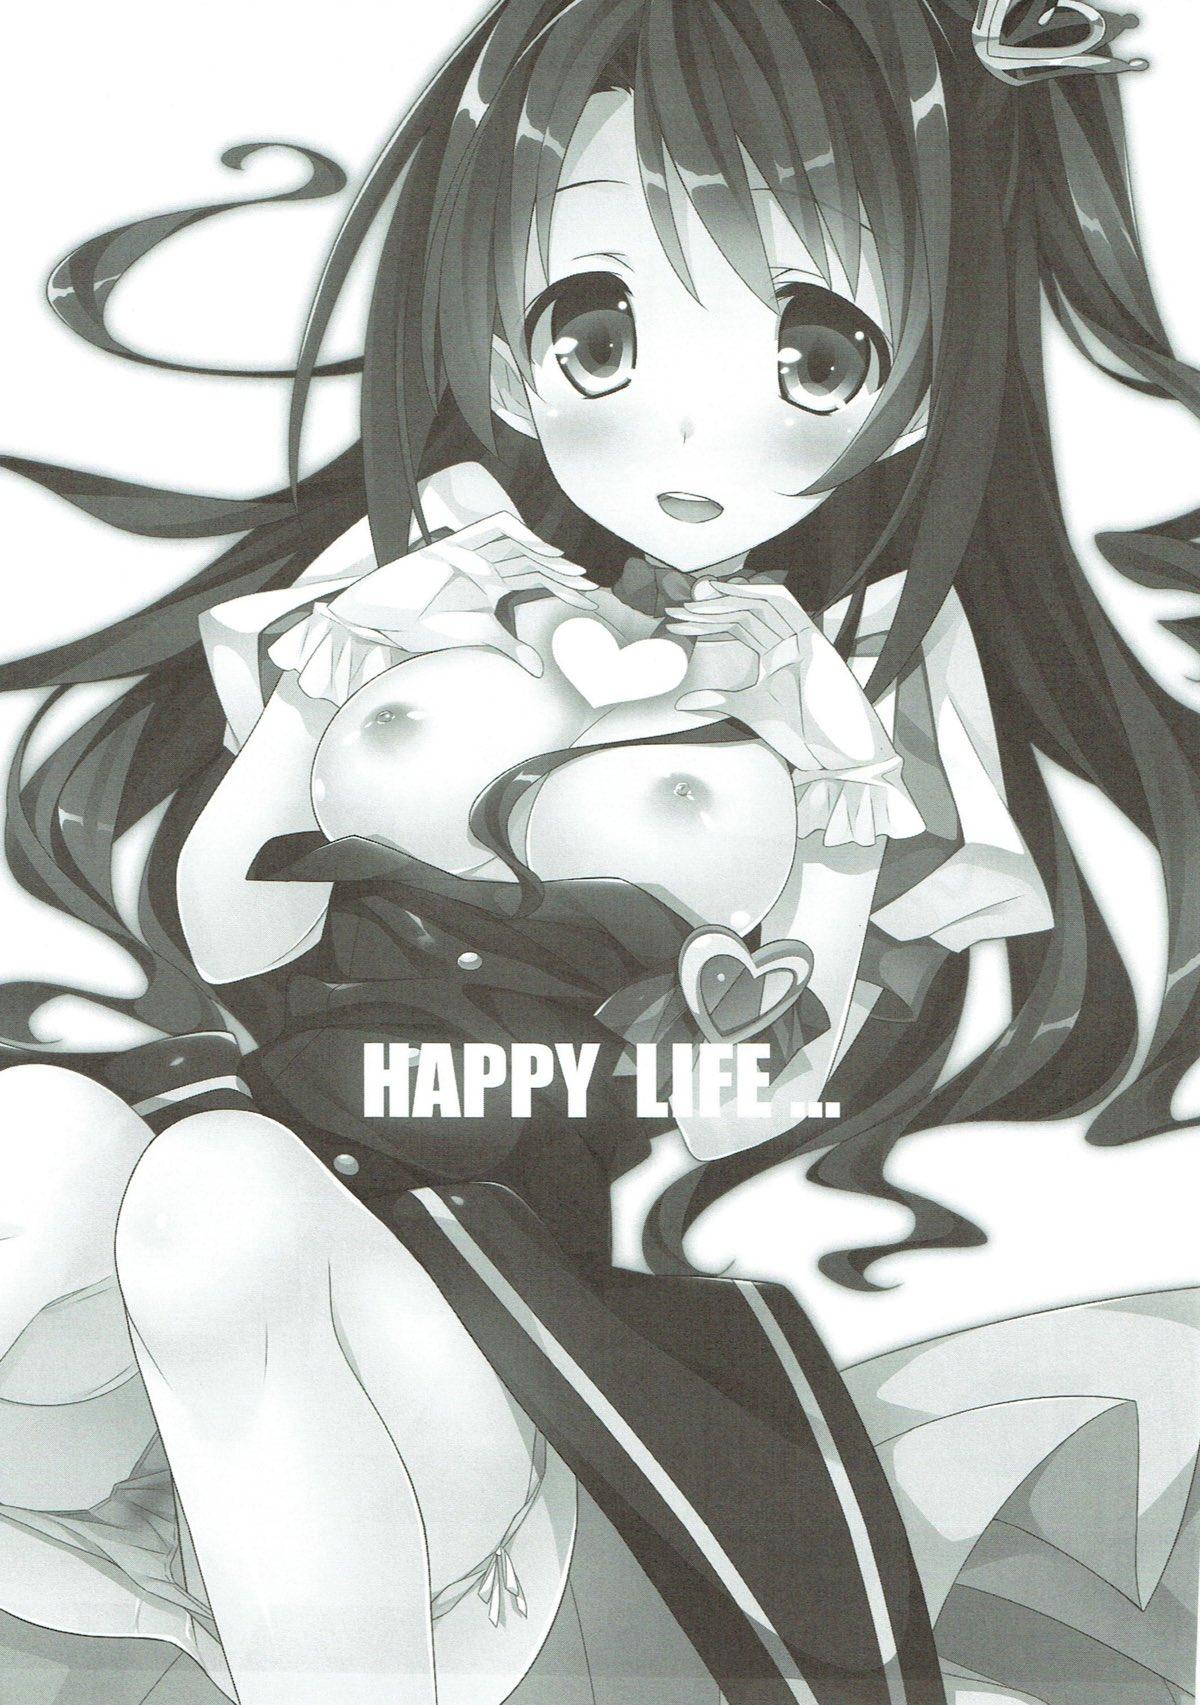 Anal Play HAPPY LIFE... - The idolmaster Dorm - Page 2